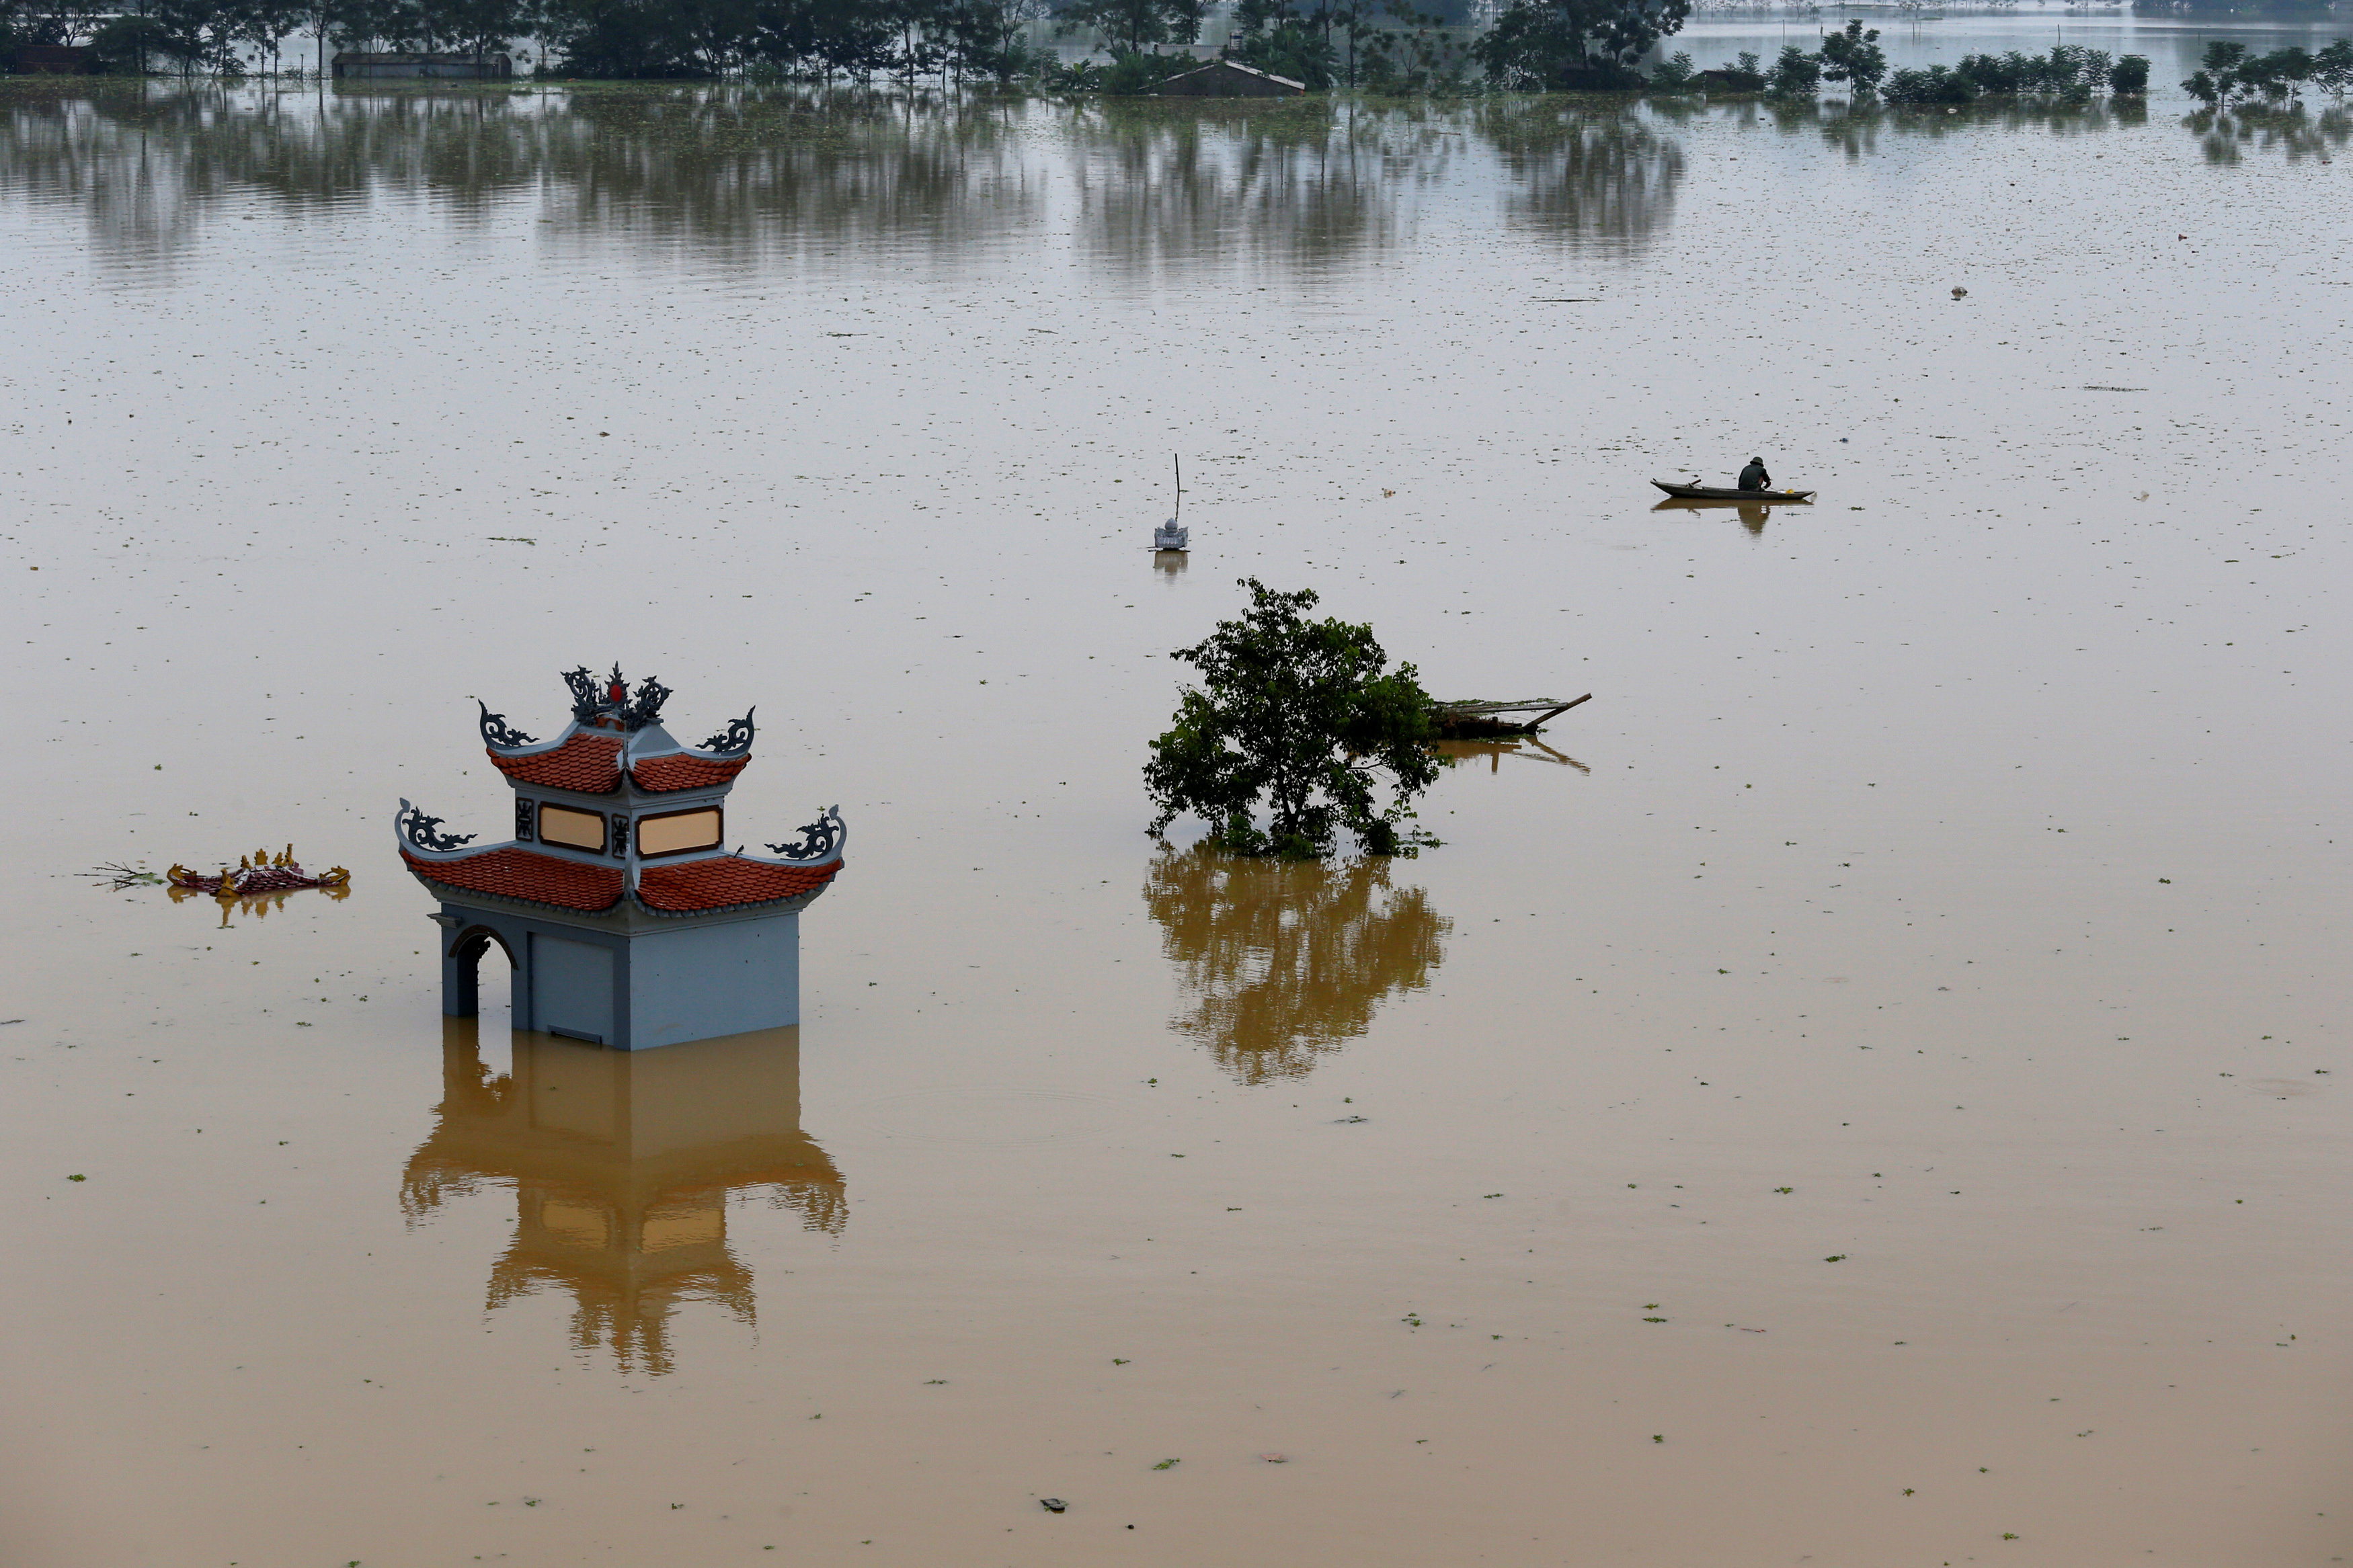 A farmer catches fish in a flooded village after a tropical depression in Hanoi, Vietnam October 13, 2017. Photo: Reuters